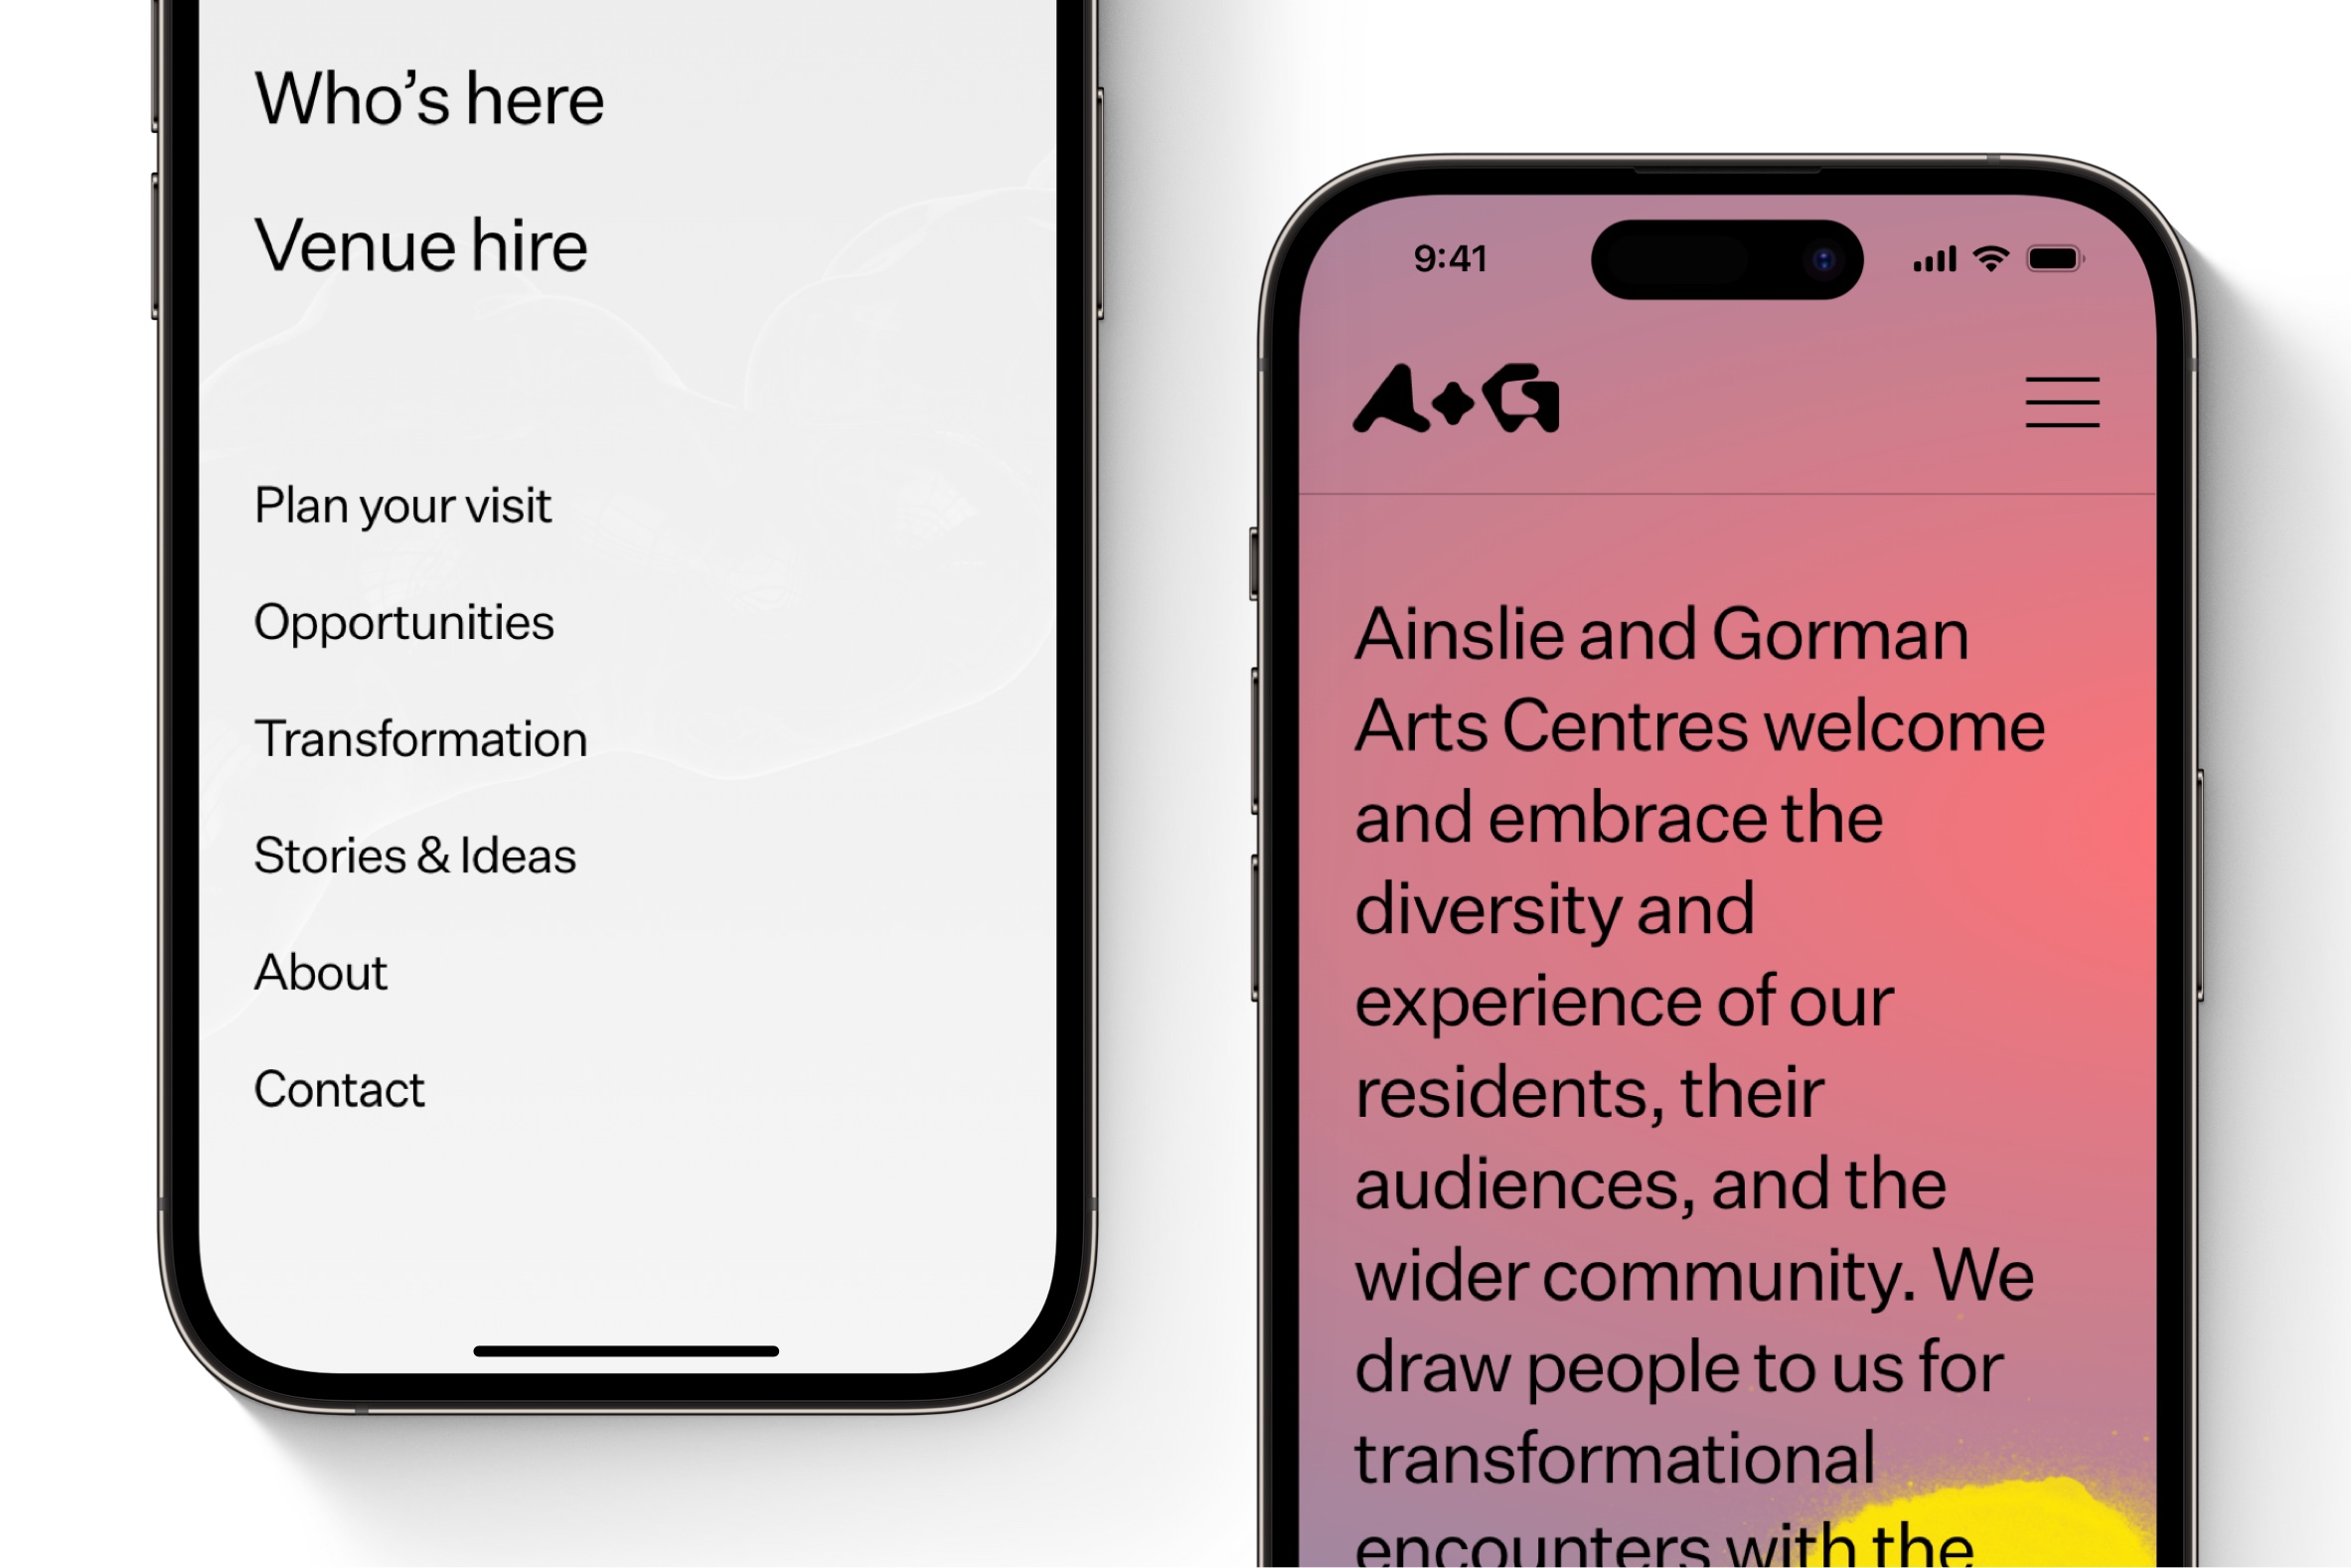 Two iPhones, one displaying the homepage of the Ainslie and Gorman Arts Centres website and the other displaying the navigation menu.